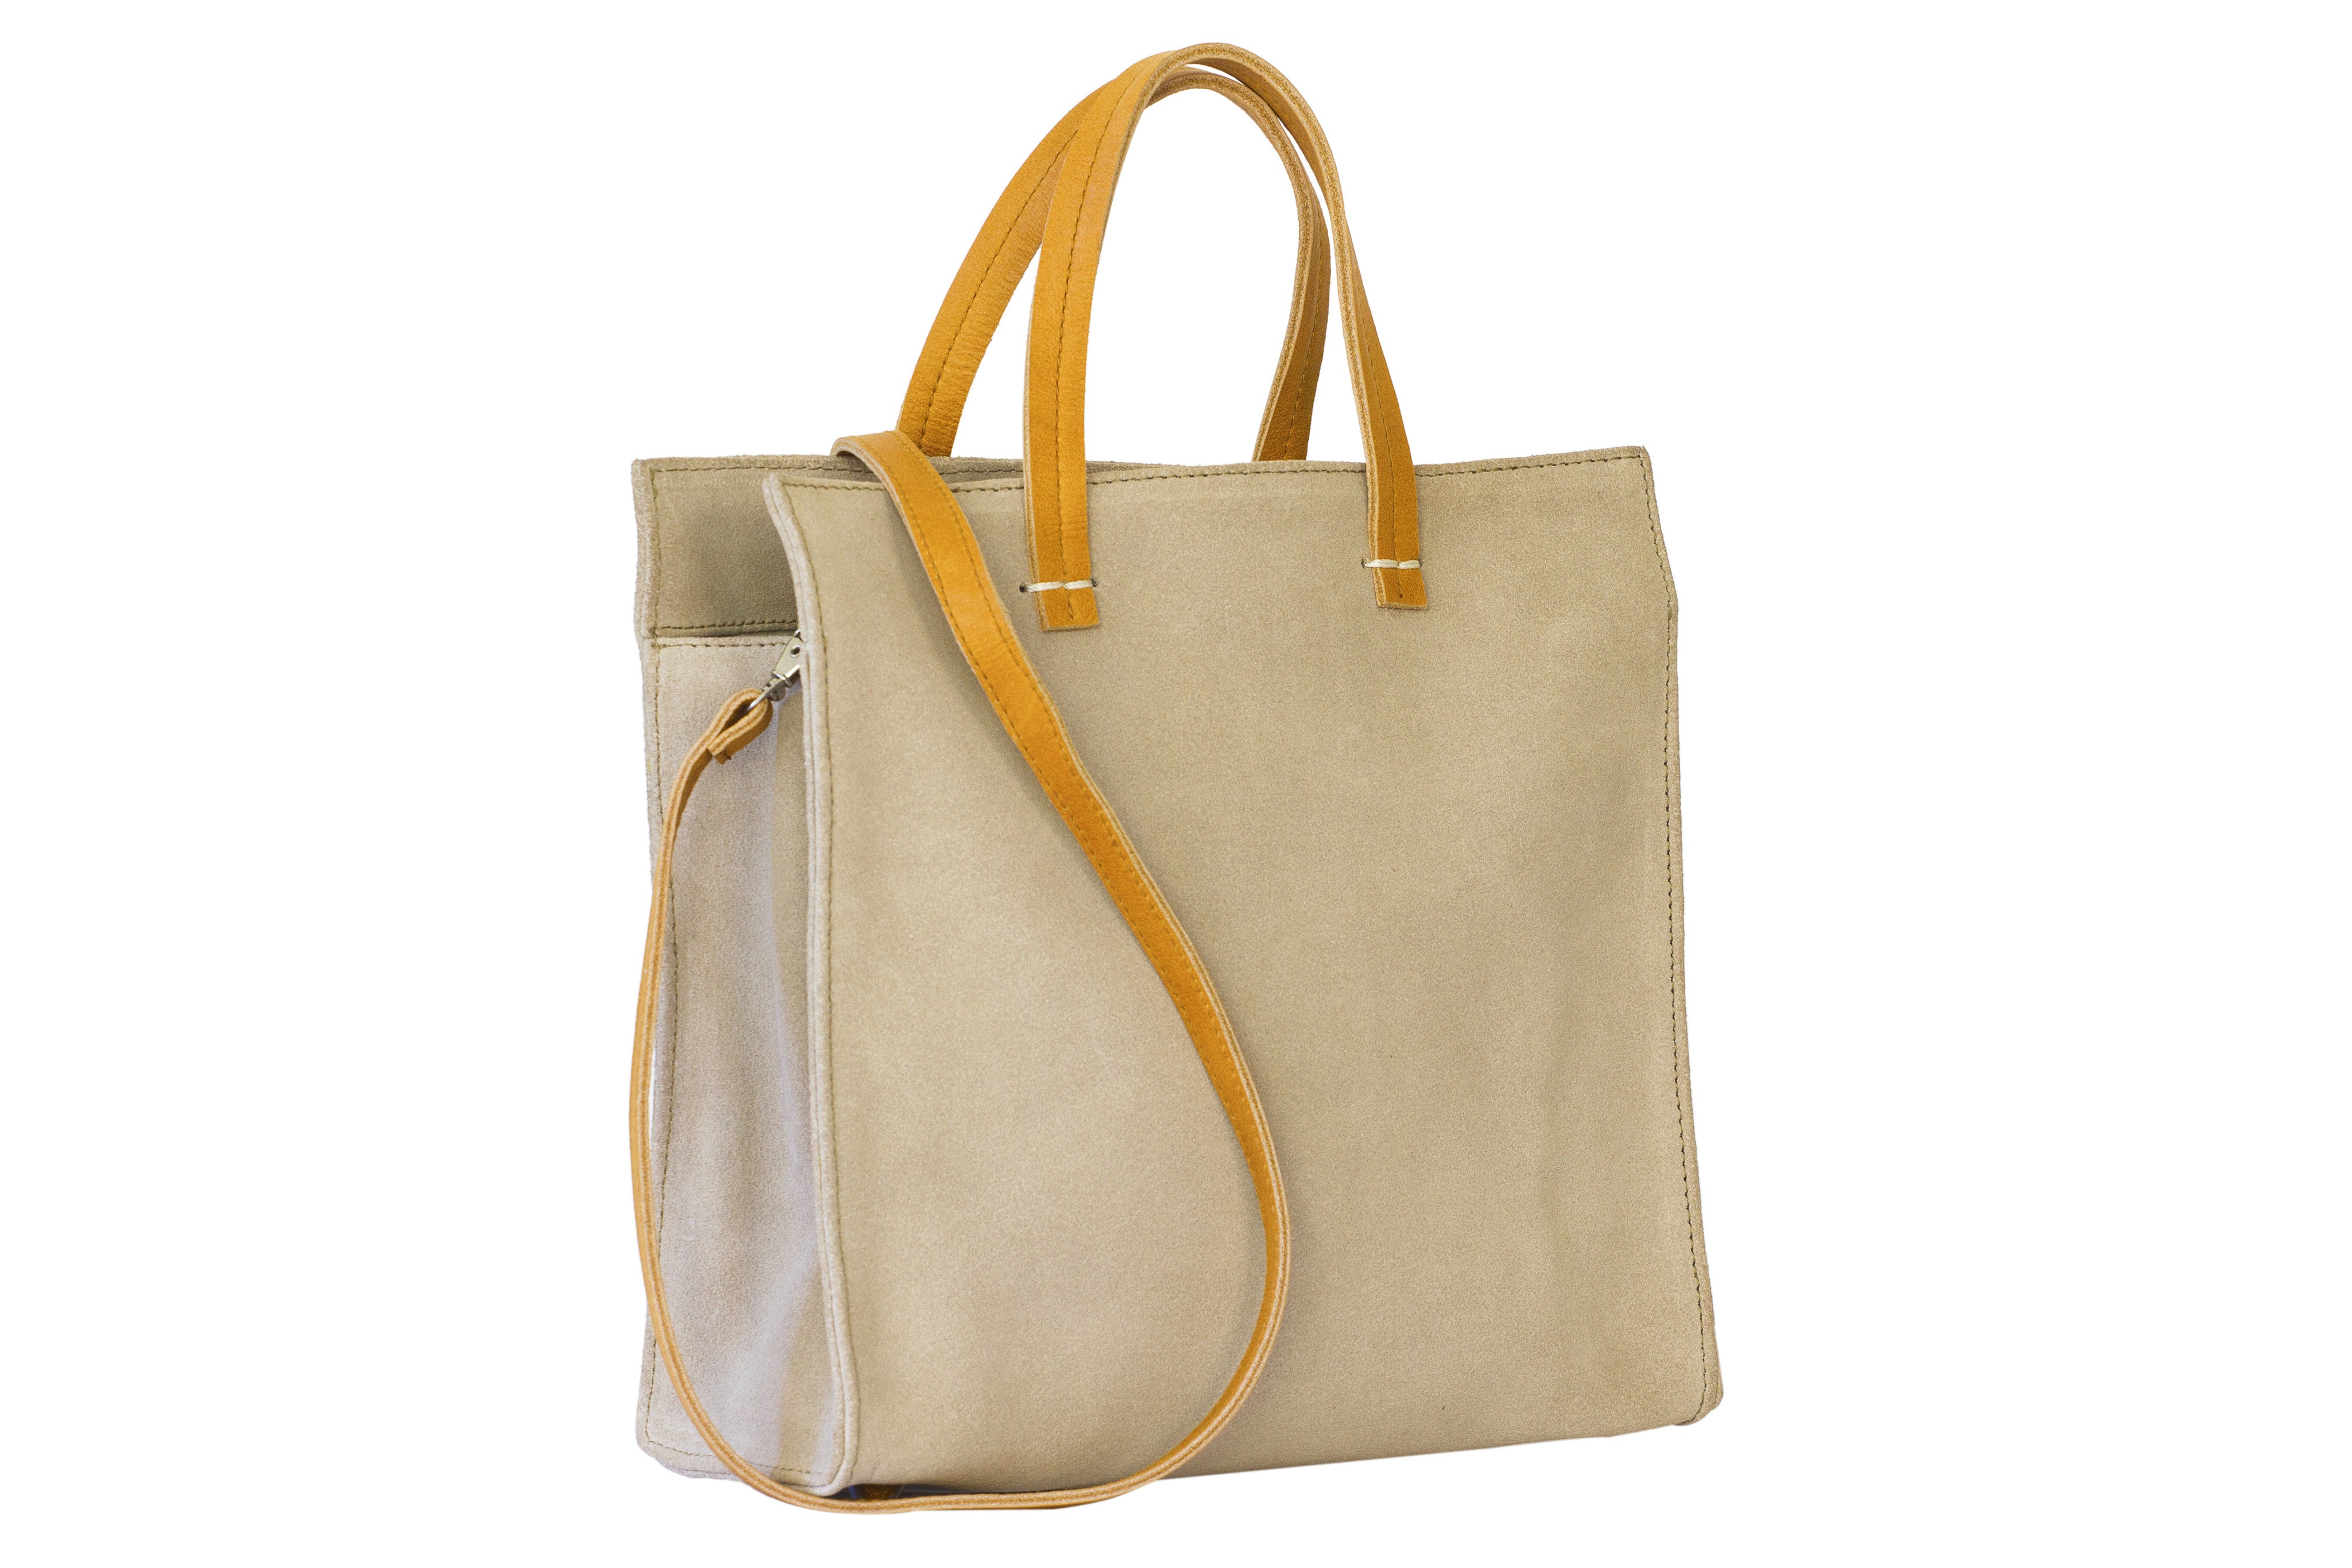 Tote; Tote handbags leather; monogrammed tote bag; tote bags for work; cheap tote bag; women's tote bag; mini tote bag; crossbody tote bag; leather tote; 